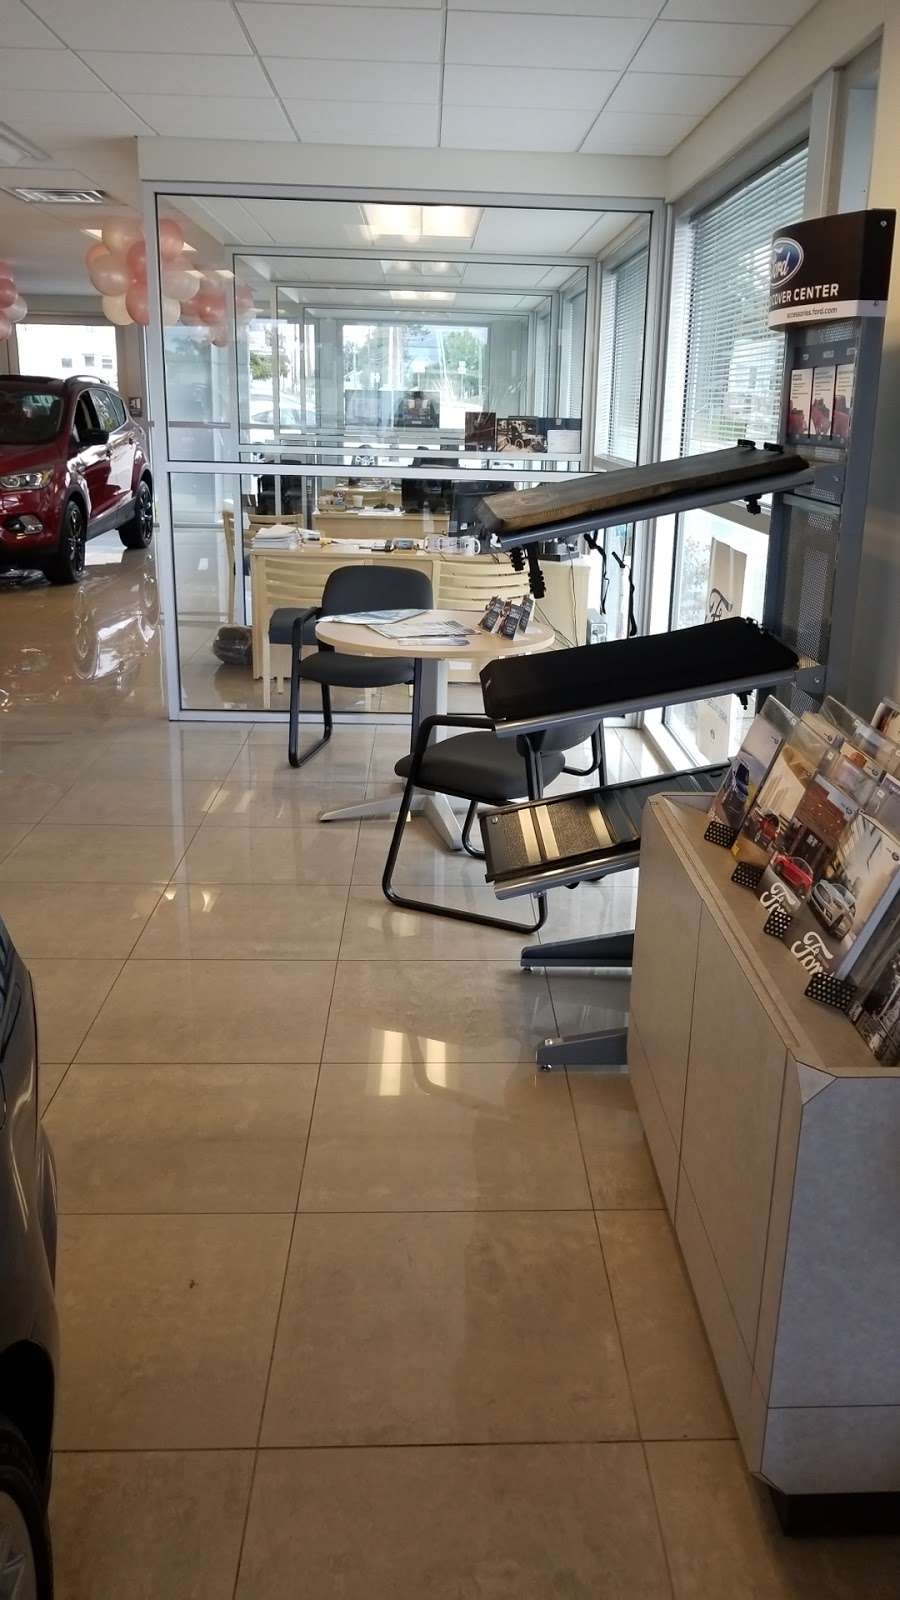 Beshore & Koller Ford | 4370 George St, Manchester, PA 17345, USA | Phone: (717) 266-3651